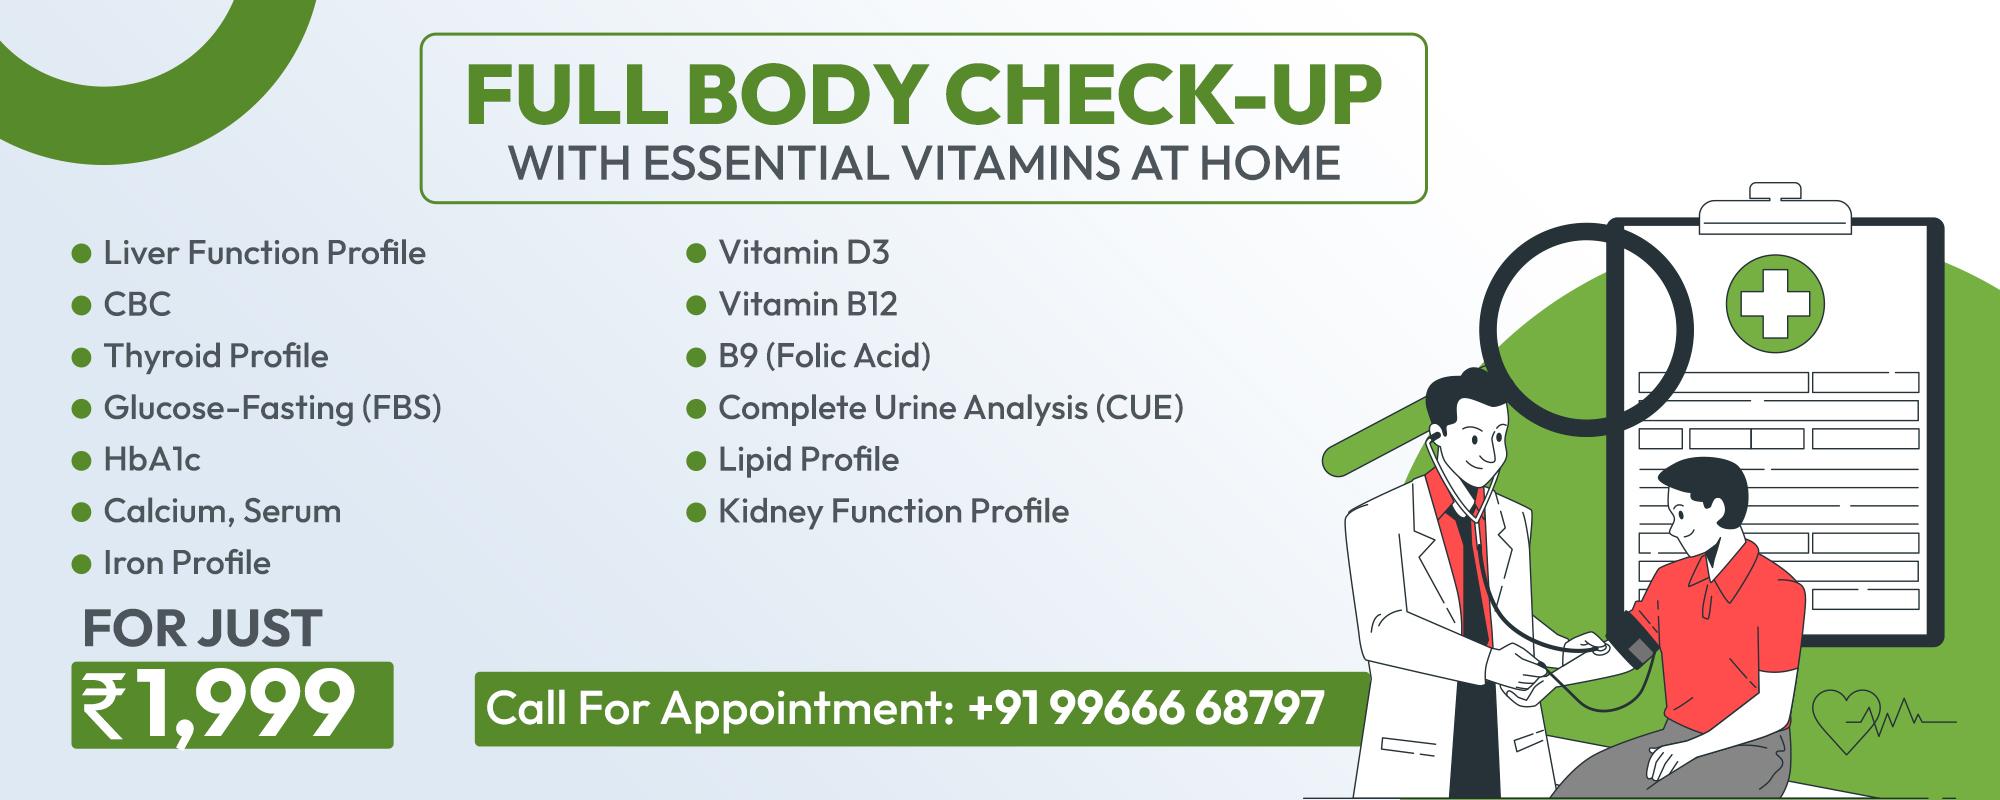 Essential Full Body Checkup with Vitamins